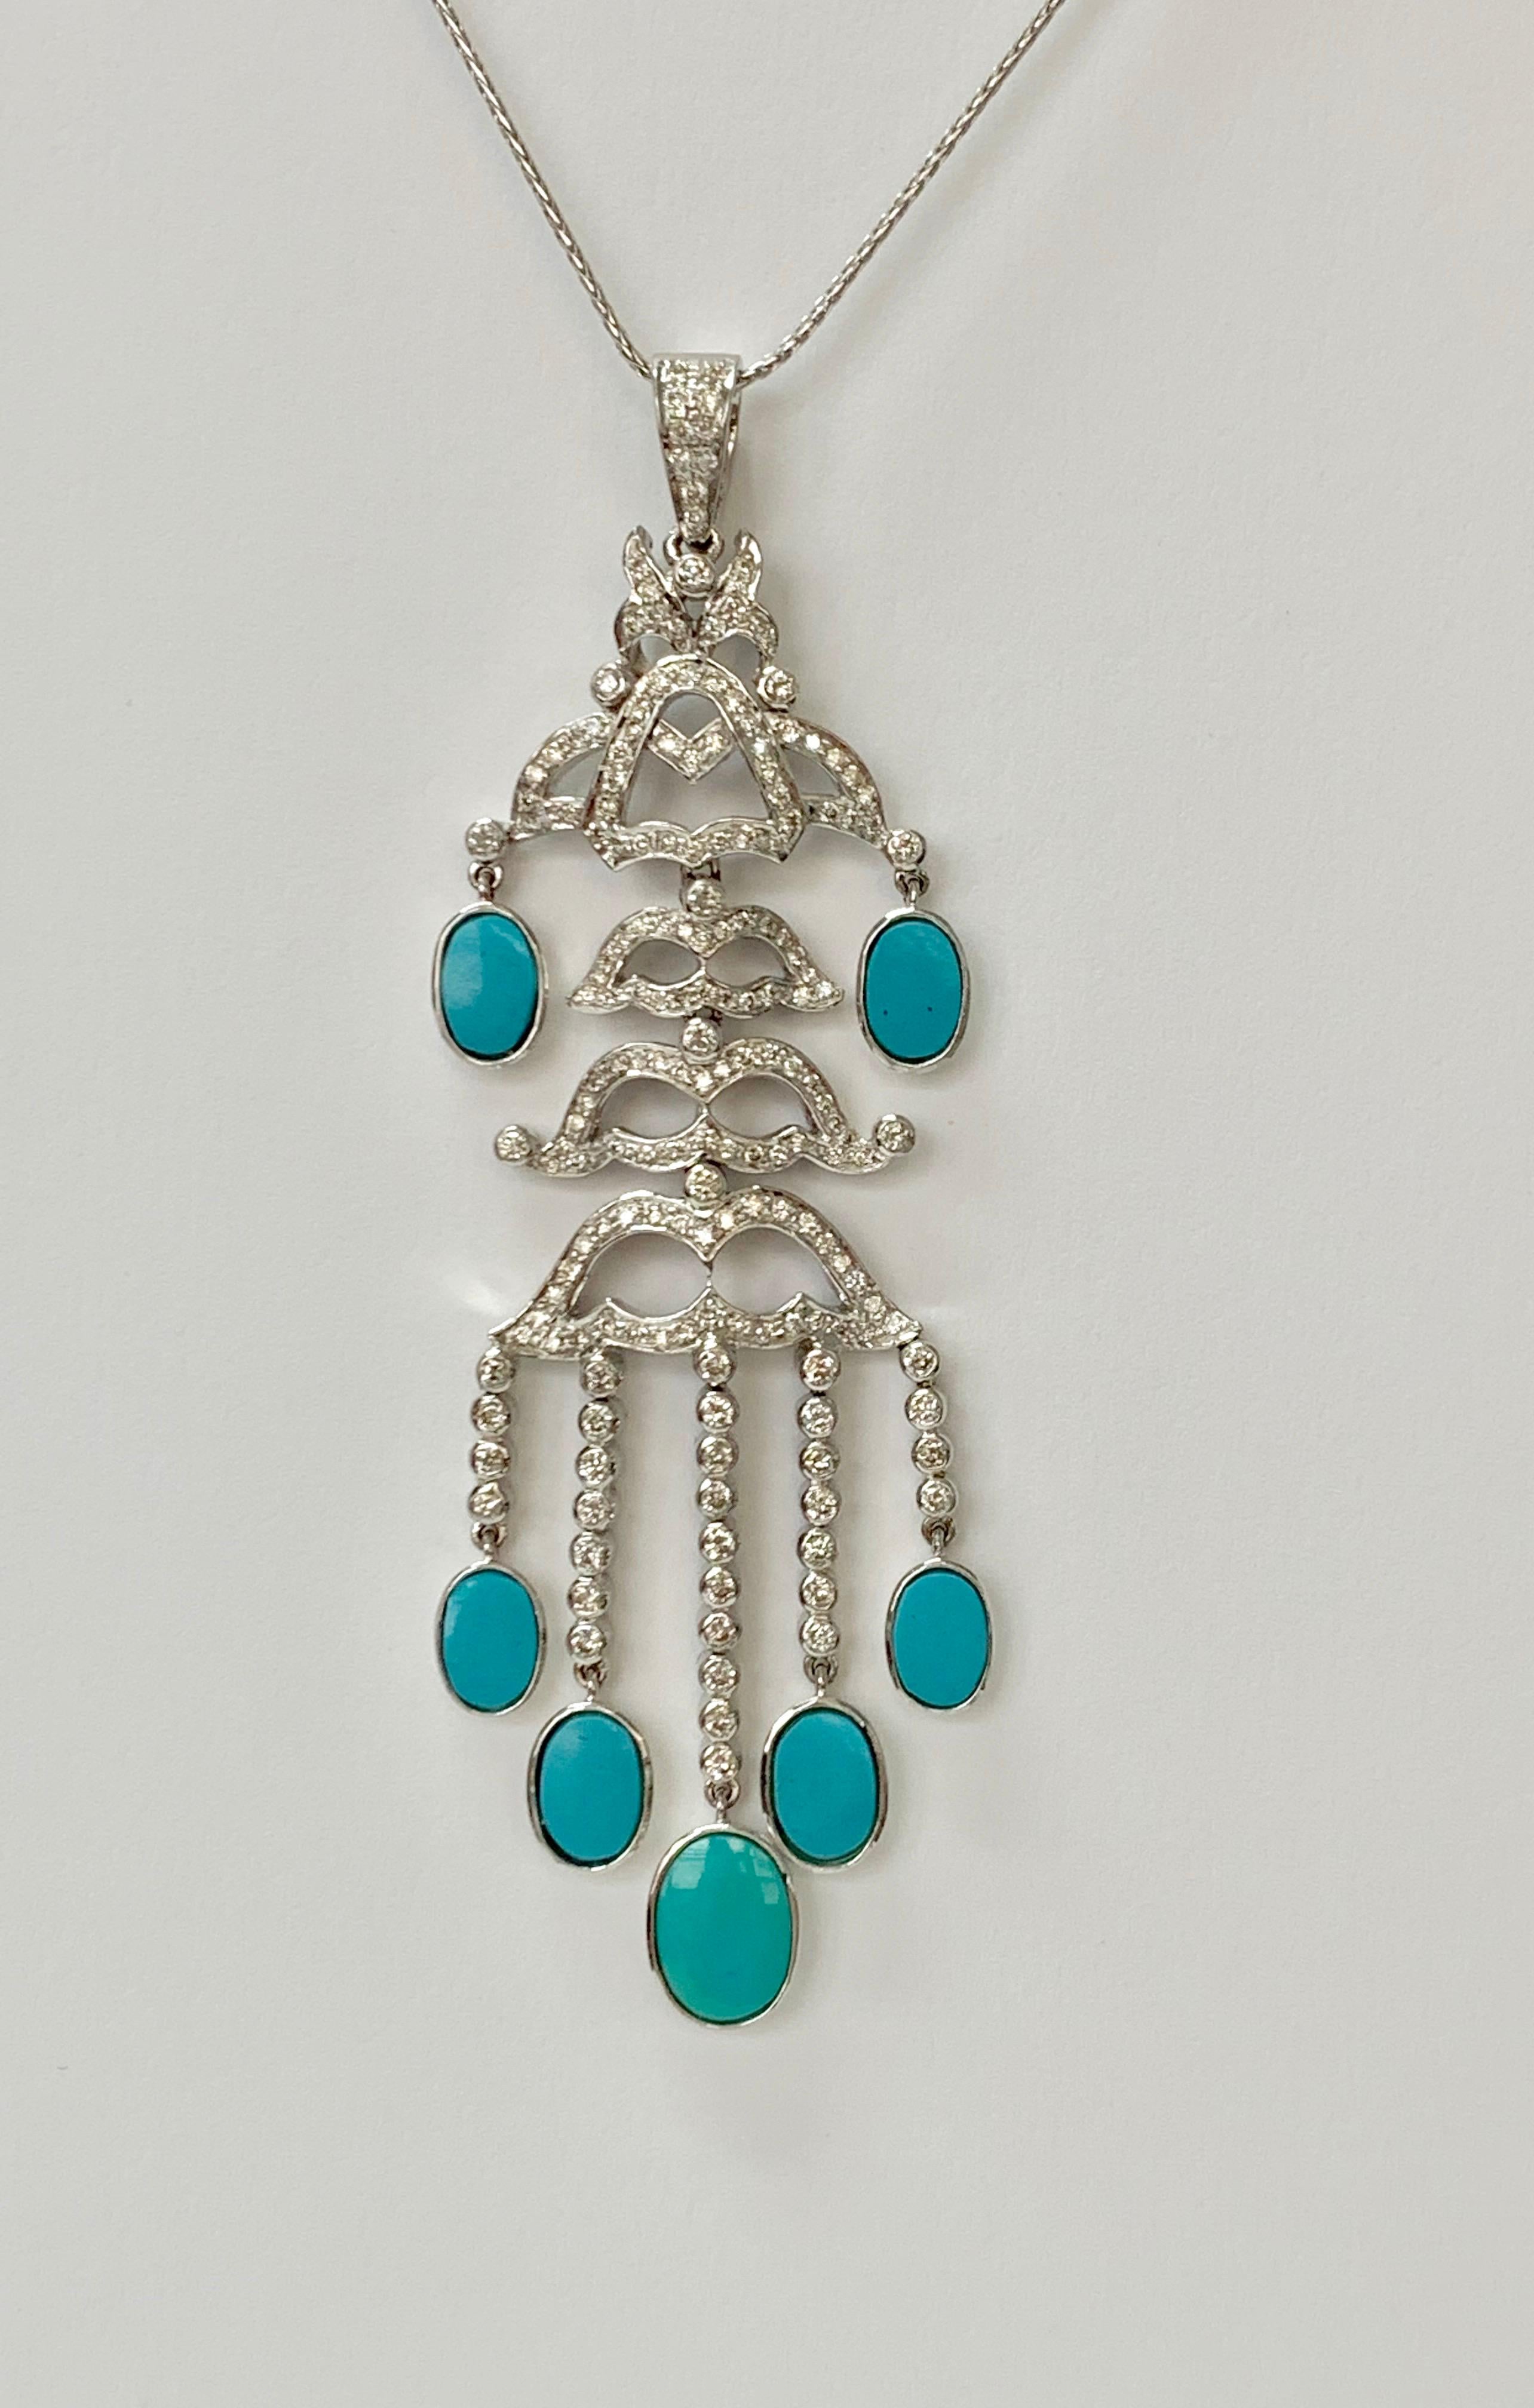 Diamond and Turquoise pendant necklace handcrafted in 18k white gold.
The details are as follows : 
Diamond weight : 1.64 carat ( GH color and VS clarity ) 
Turquoise weight : 5 carat 
Metal : 18k white gold 
Measurements : 3 1/2 inches long 
